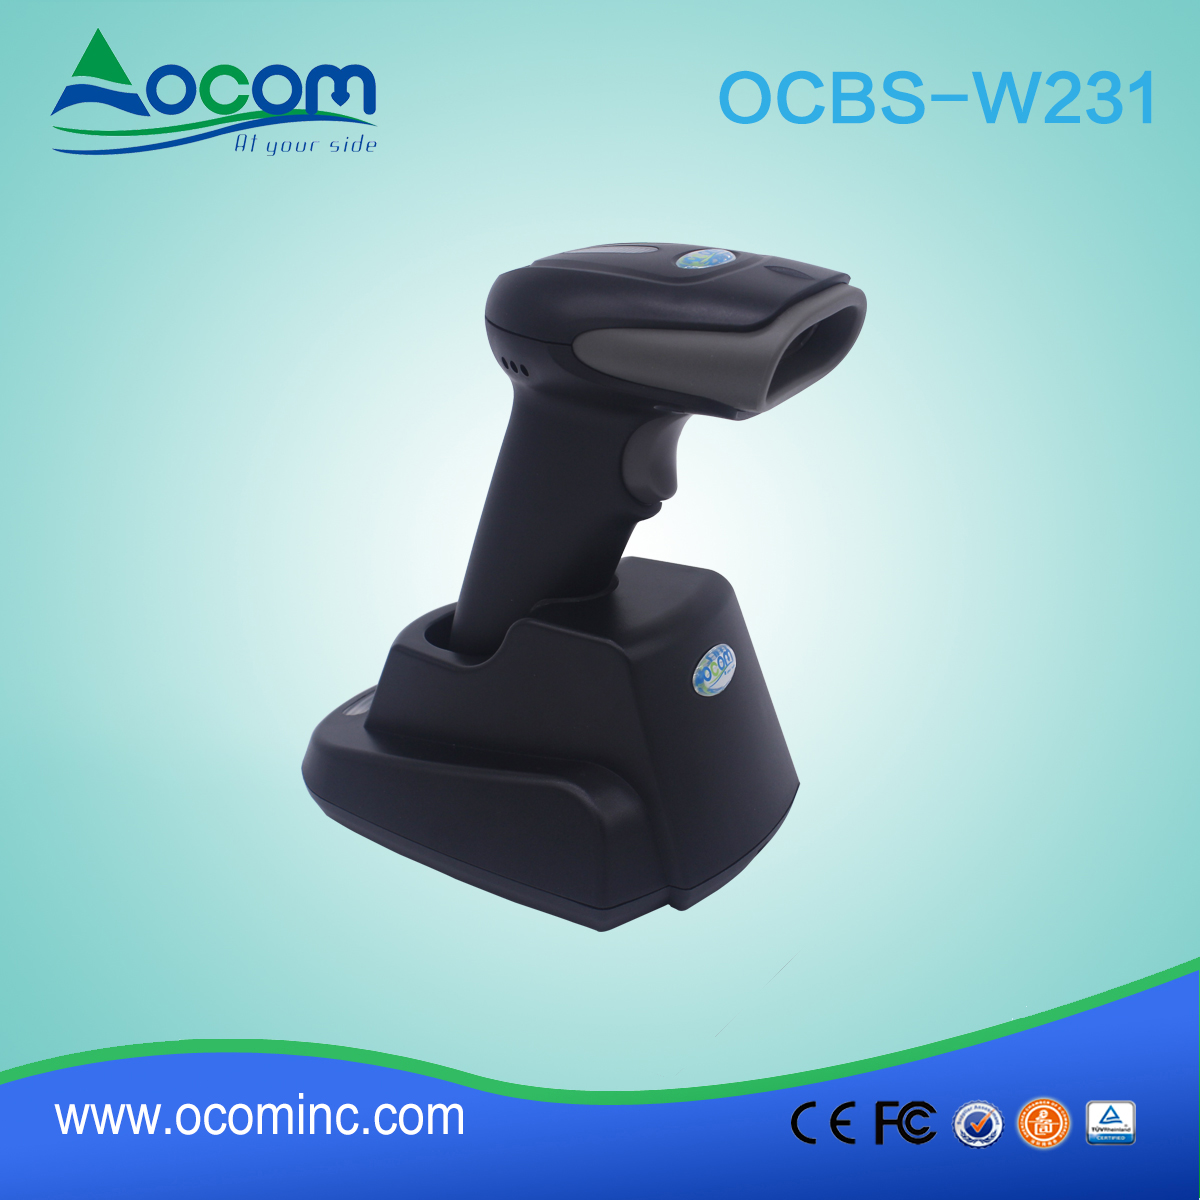 OCBS-W231 Ticket Barcode Reader for PDF417 Codes